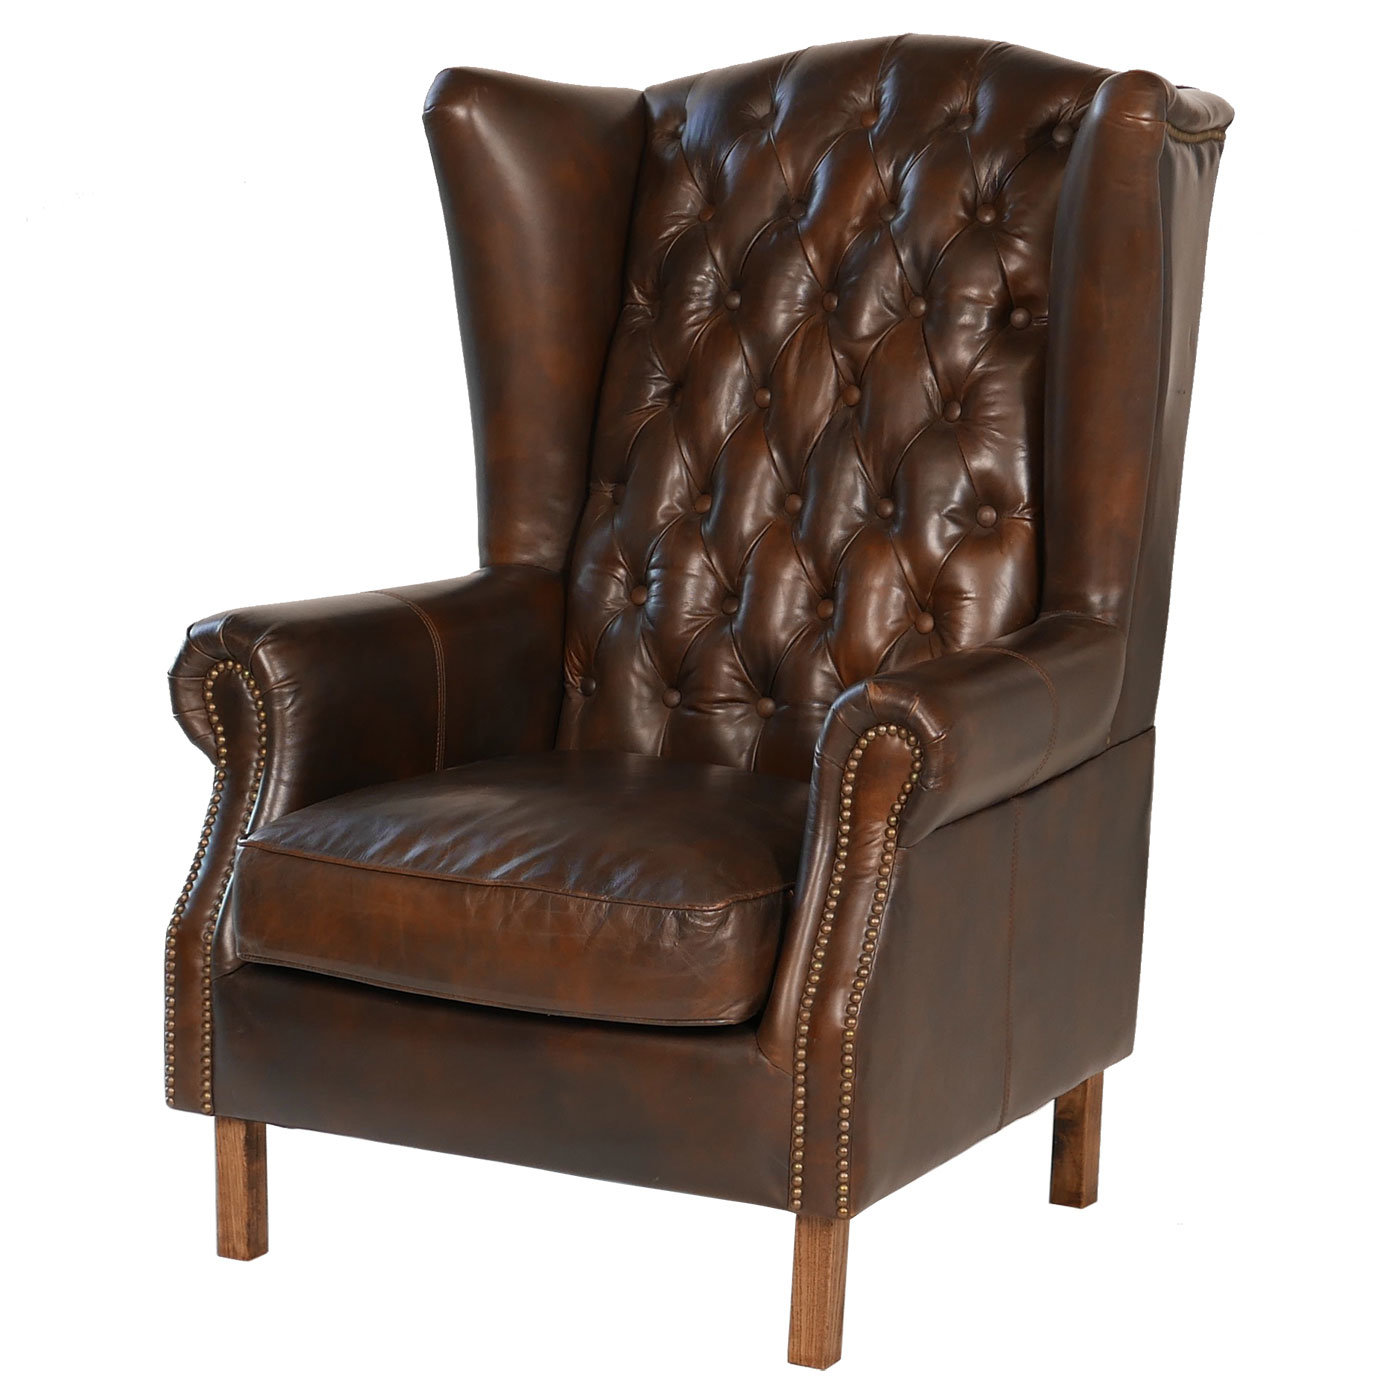 Leather Winged Armchair Off 69, Wingback Chairs Leather